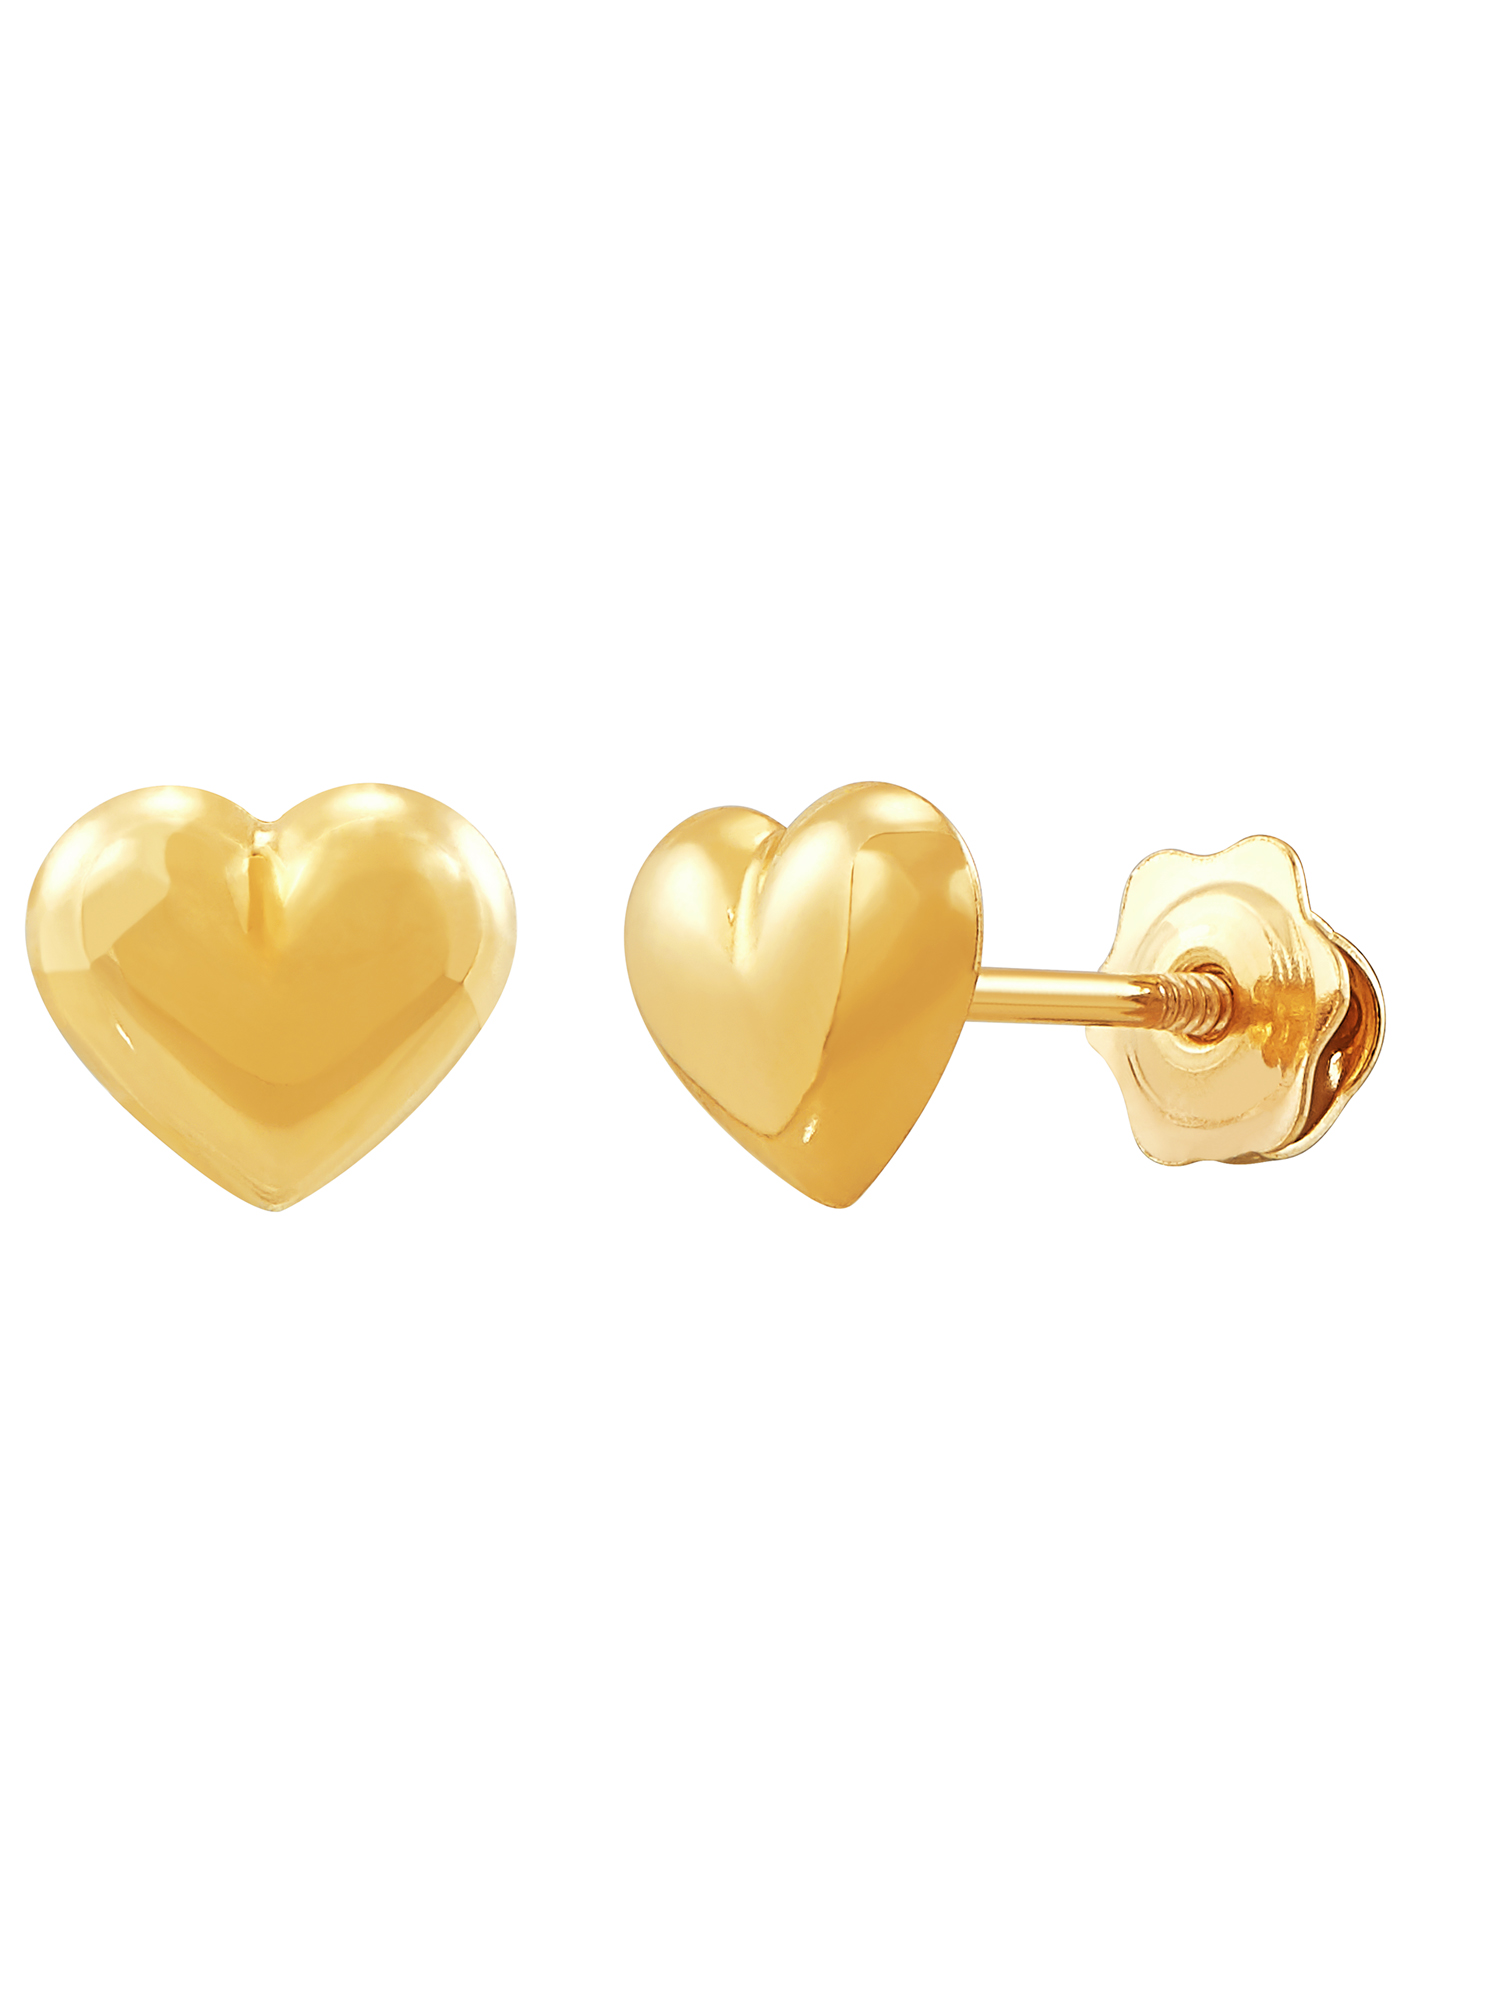 Brilliance Fine Jewelry 10K Yellow Gold Puffed Heart Stud with Safety Screw Back Earrings - image 3 of 4